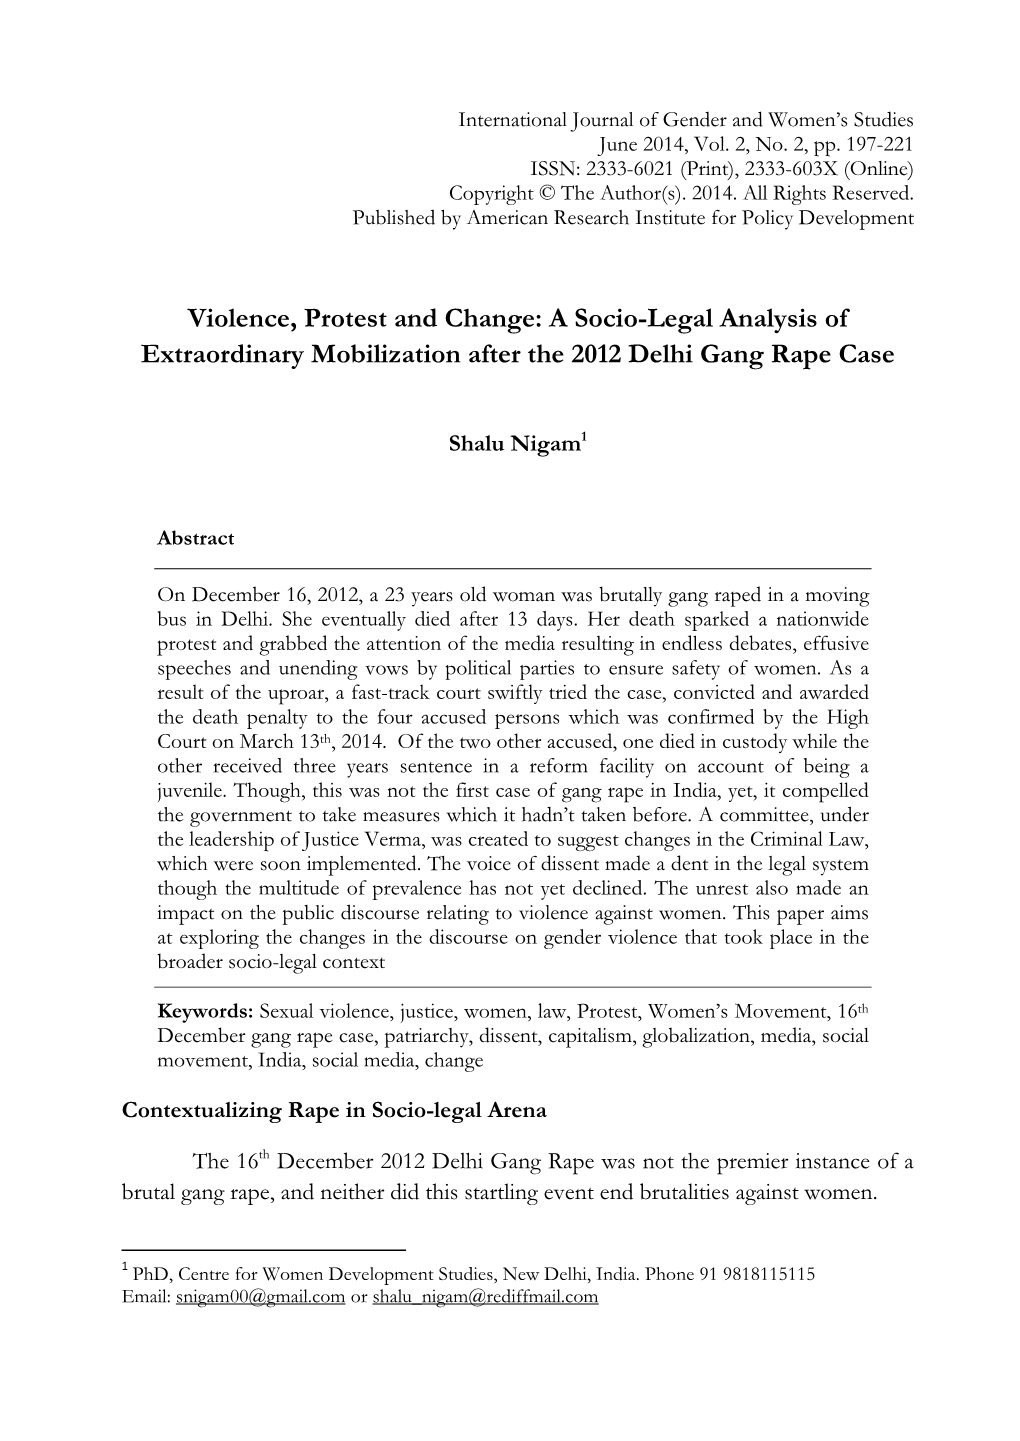 Violence, Protest and Change: a Socio-Legal Analysis of Extraordinary Mobilization After the 2012 Delhi Gang Rape Case